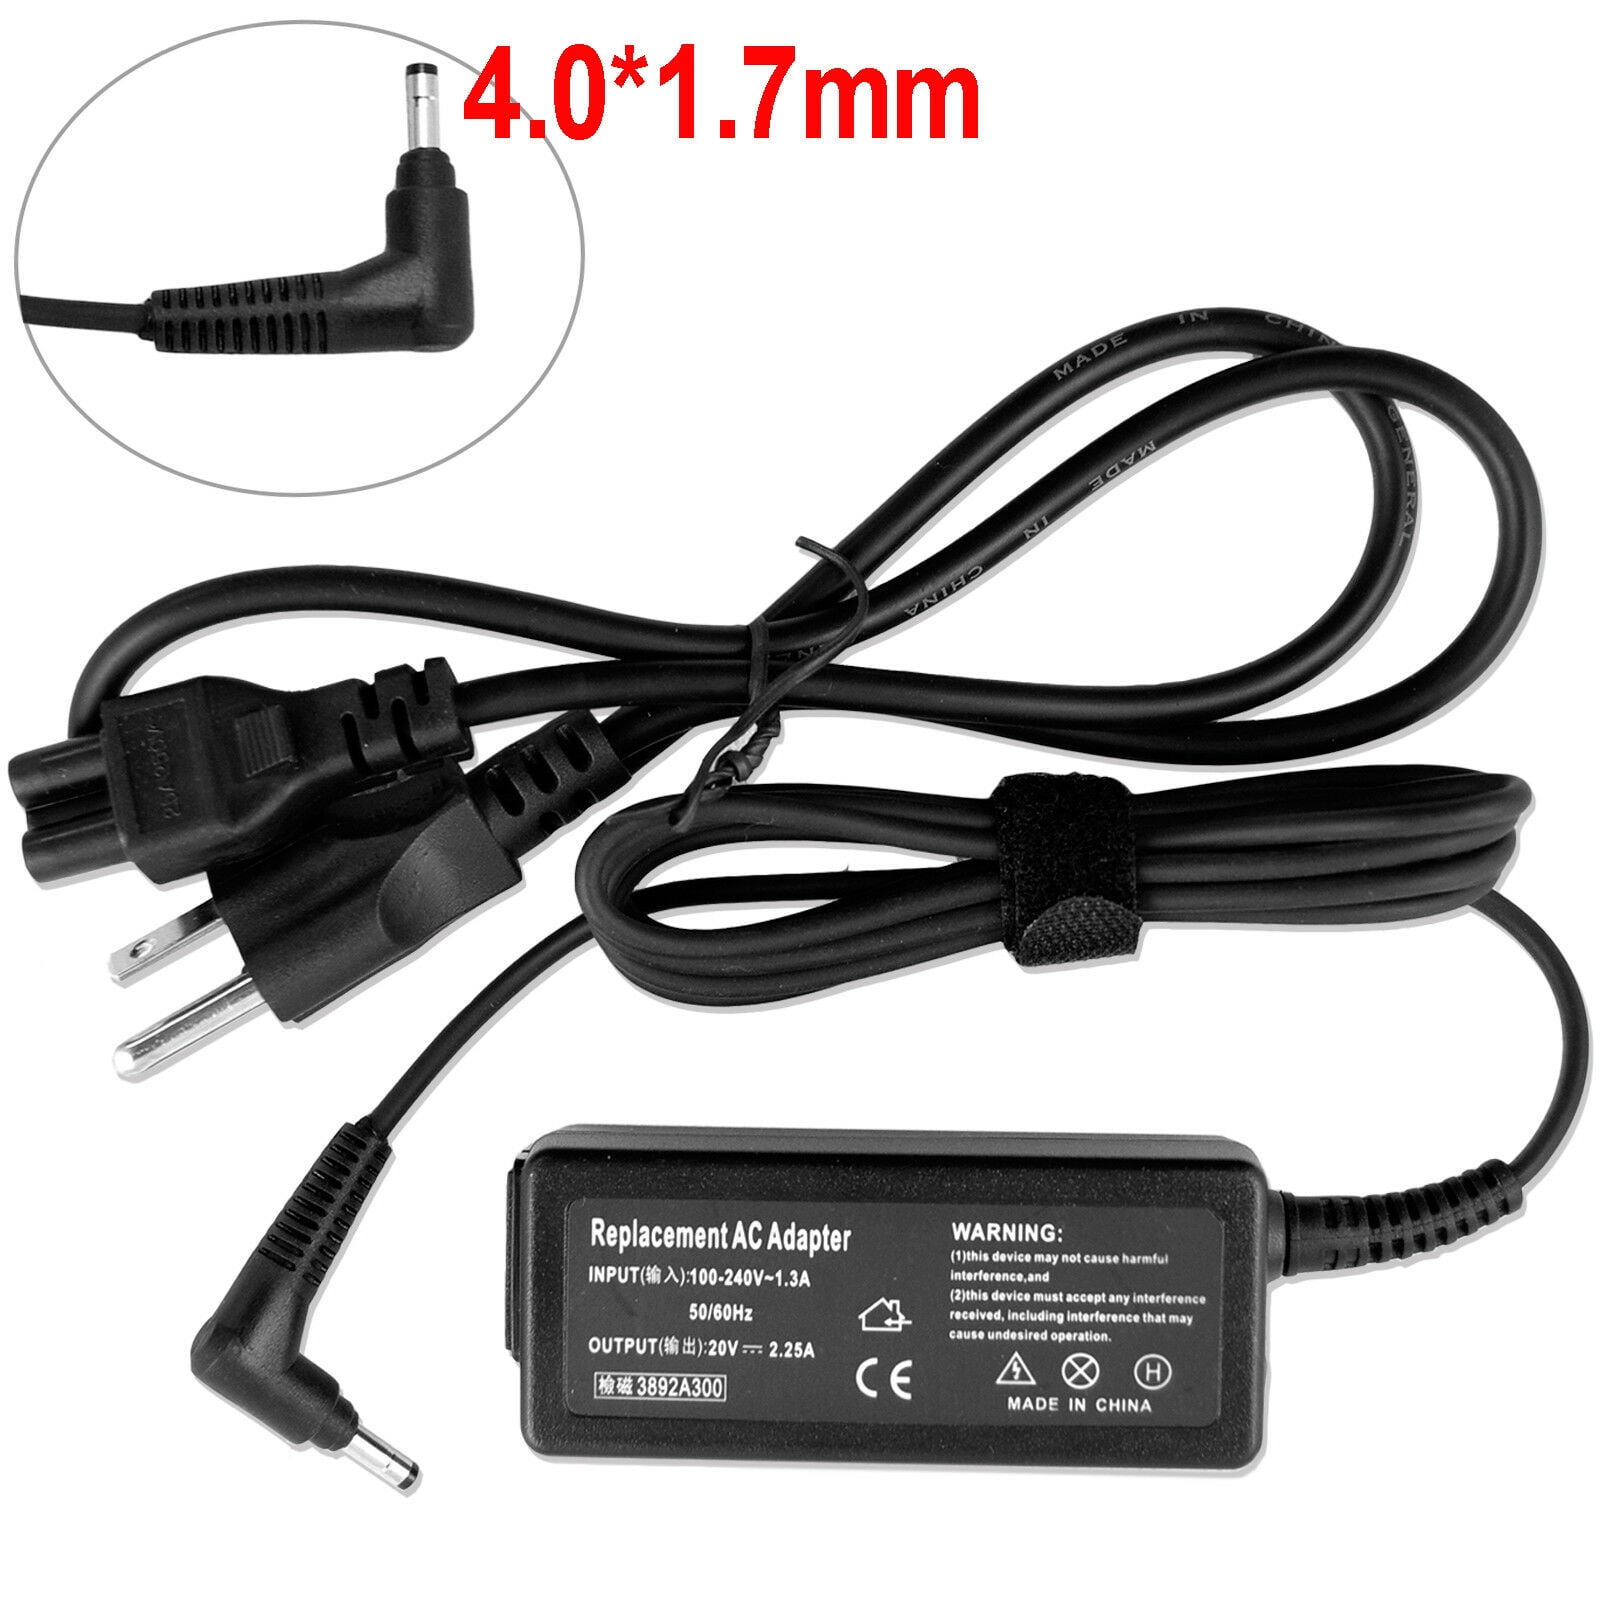 Genuine Original Lenovo Laptop Power Supply Cable AC Adapter Charger 45W 1.7mm 